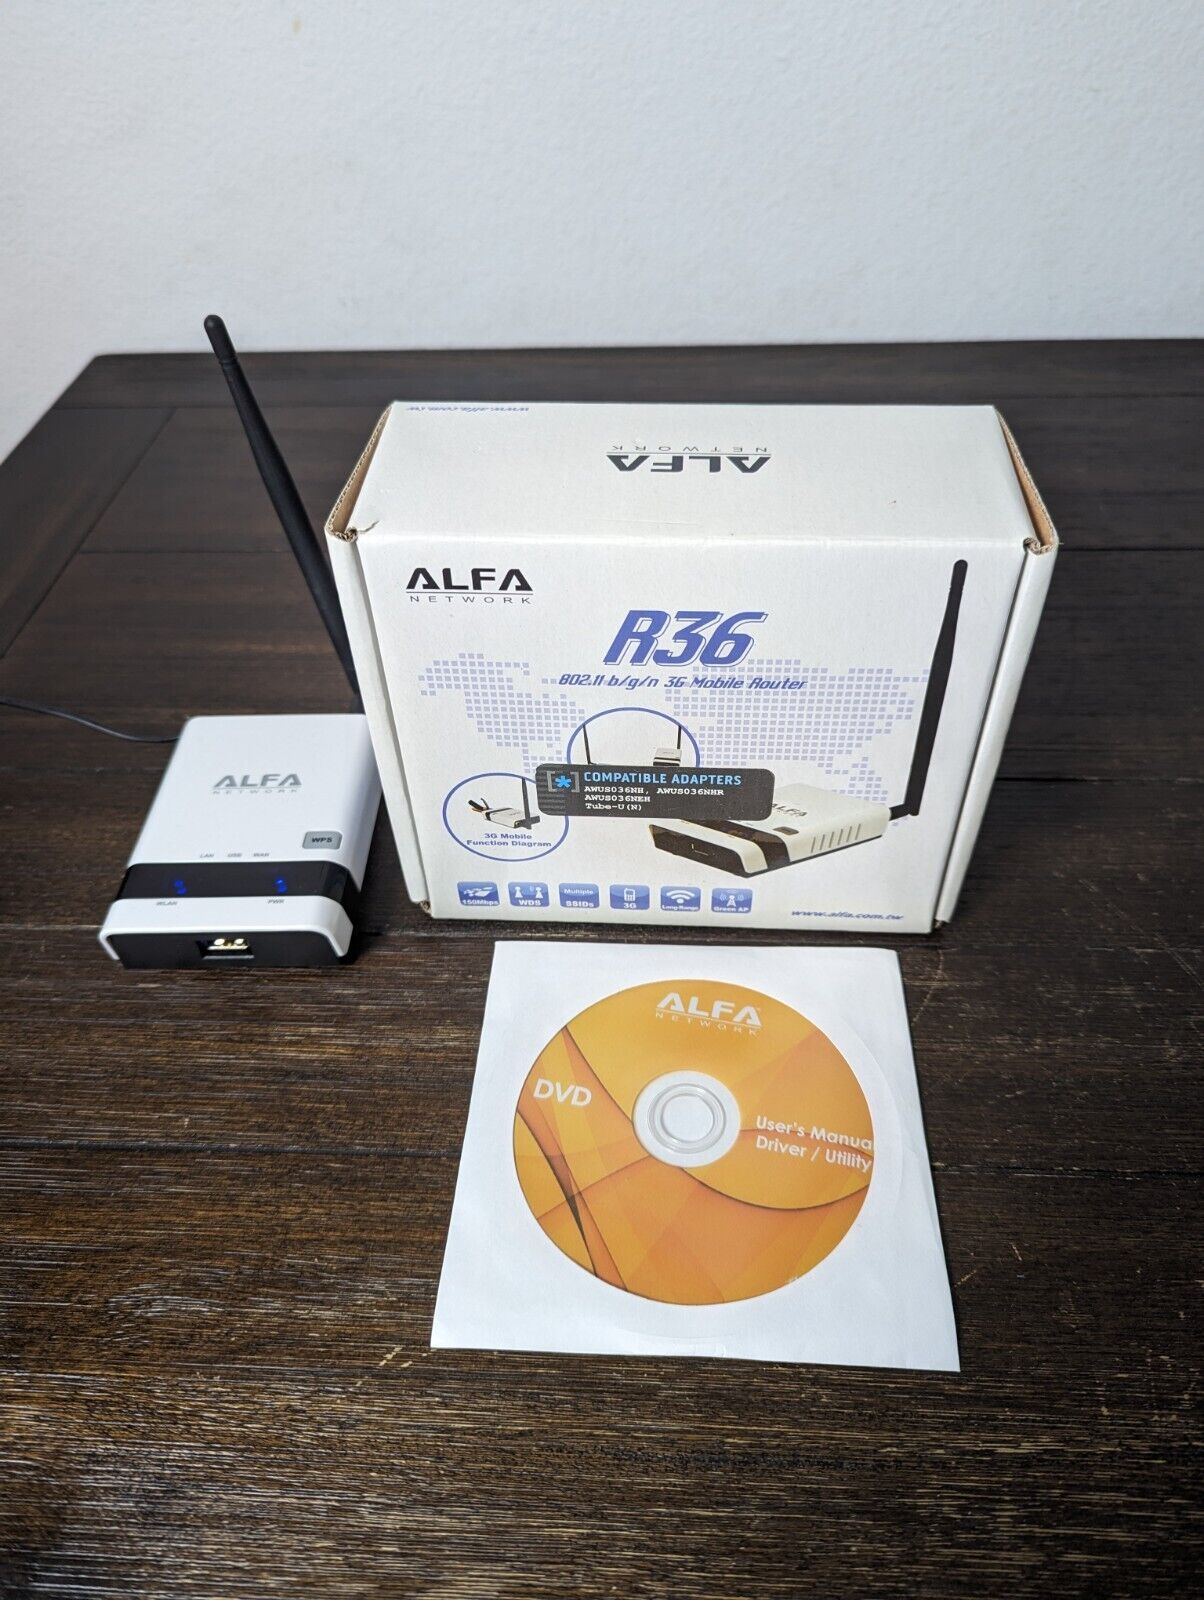 ALFA Network R36 802.11 b/g/n 3G Mobile Router w/ DVD Driver Tested 